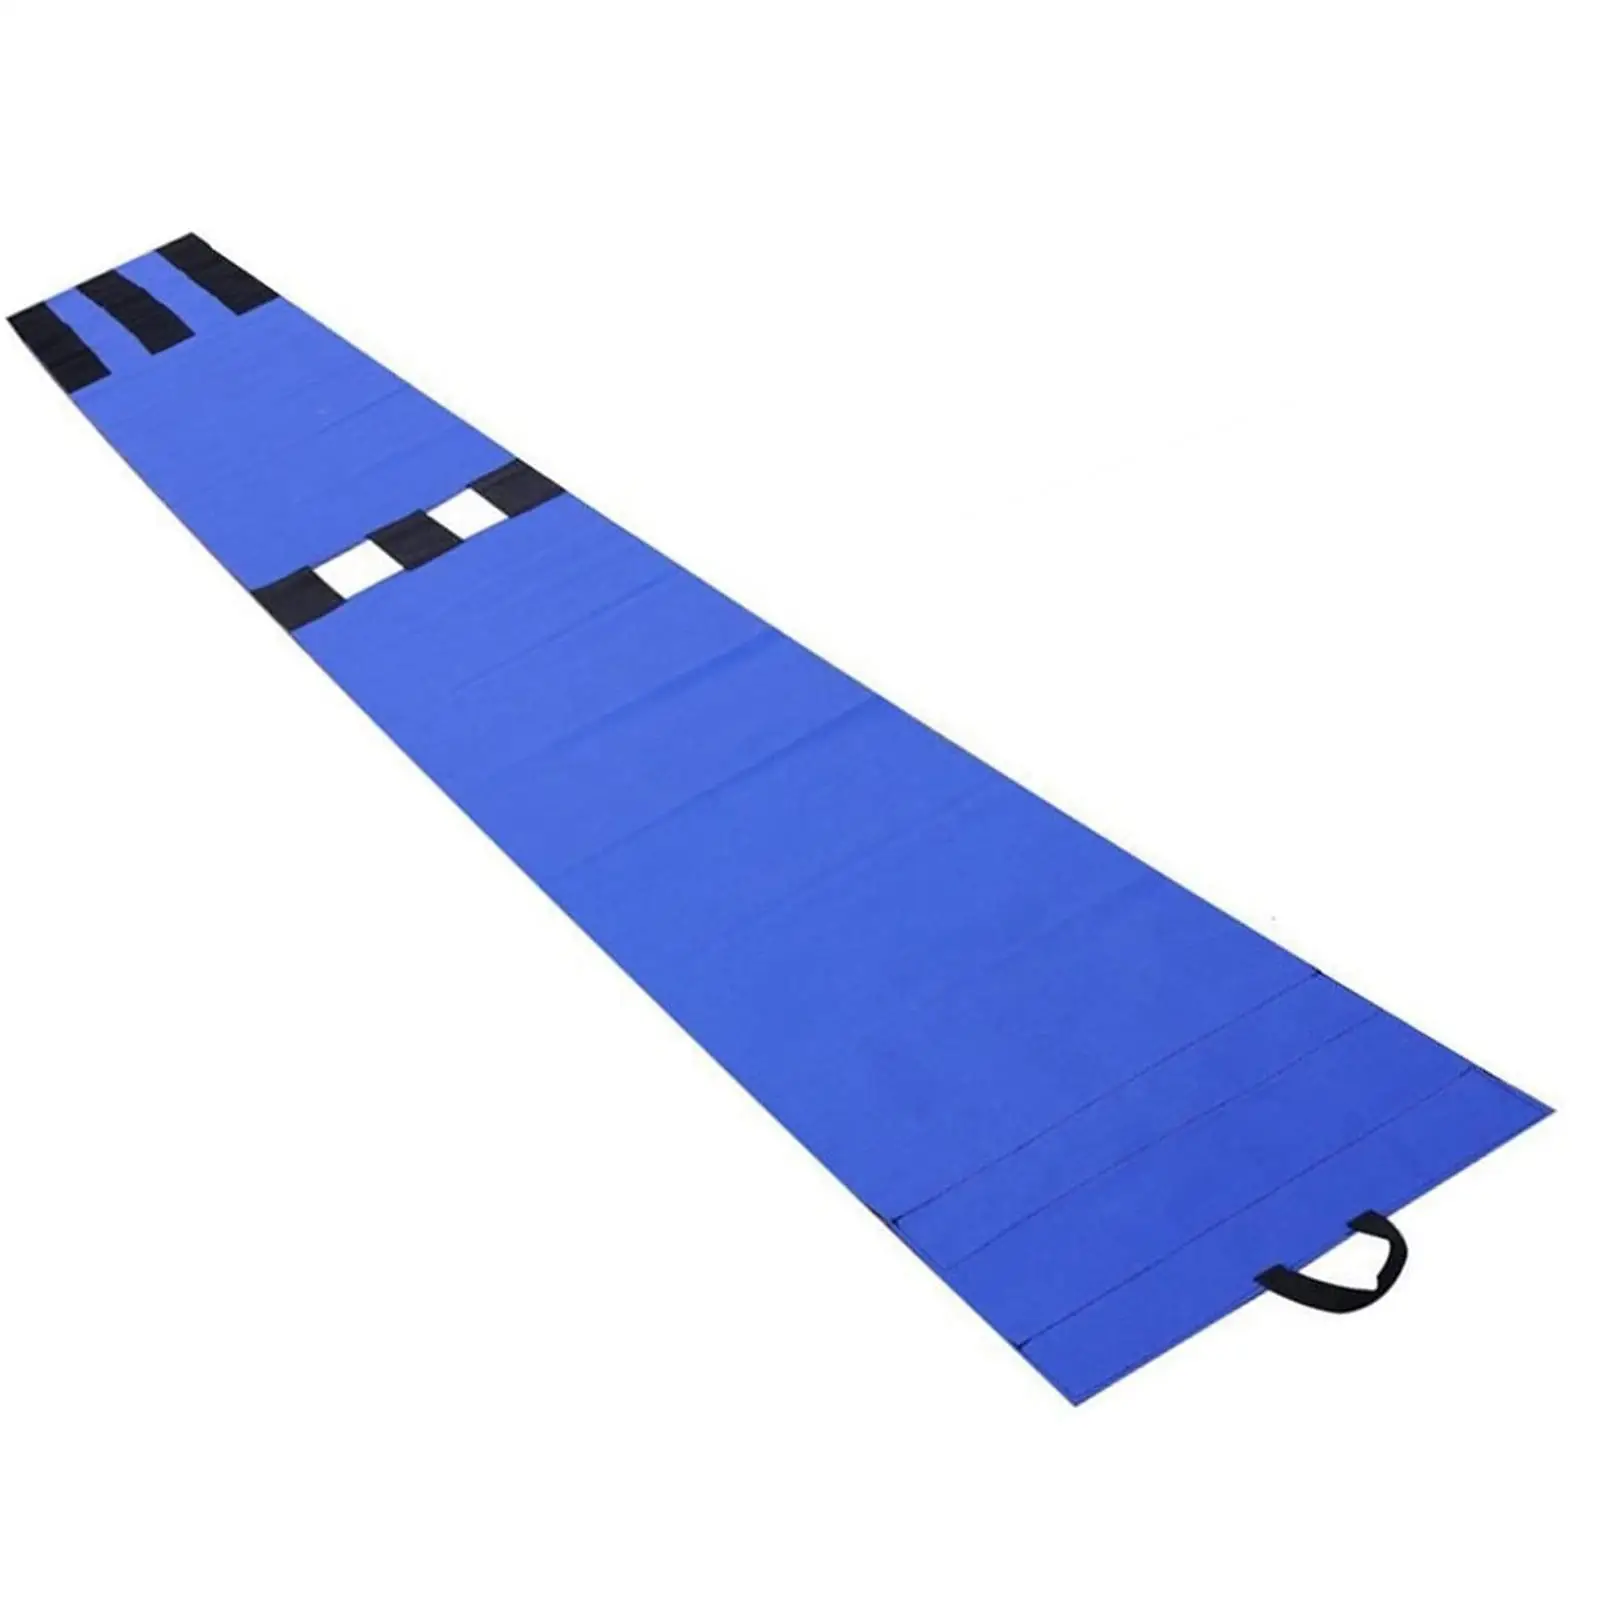 Binding Belt Strapping Convenient Reusable Easy to Use for Logistics Company